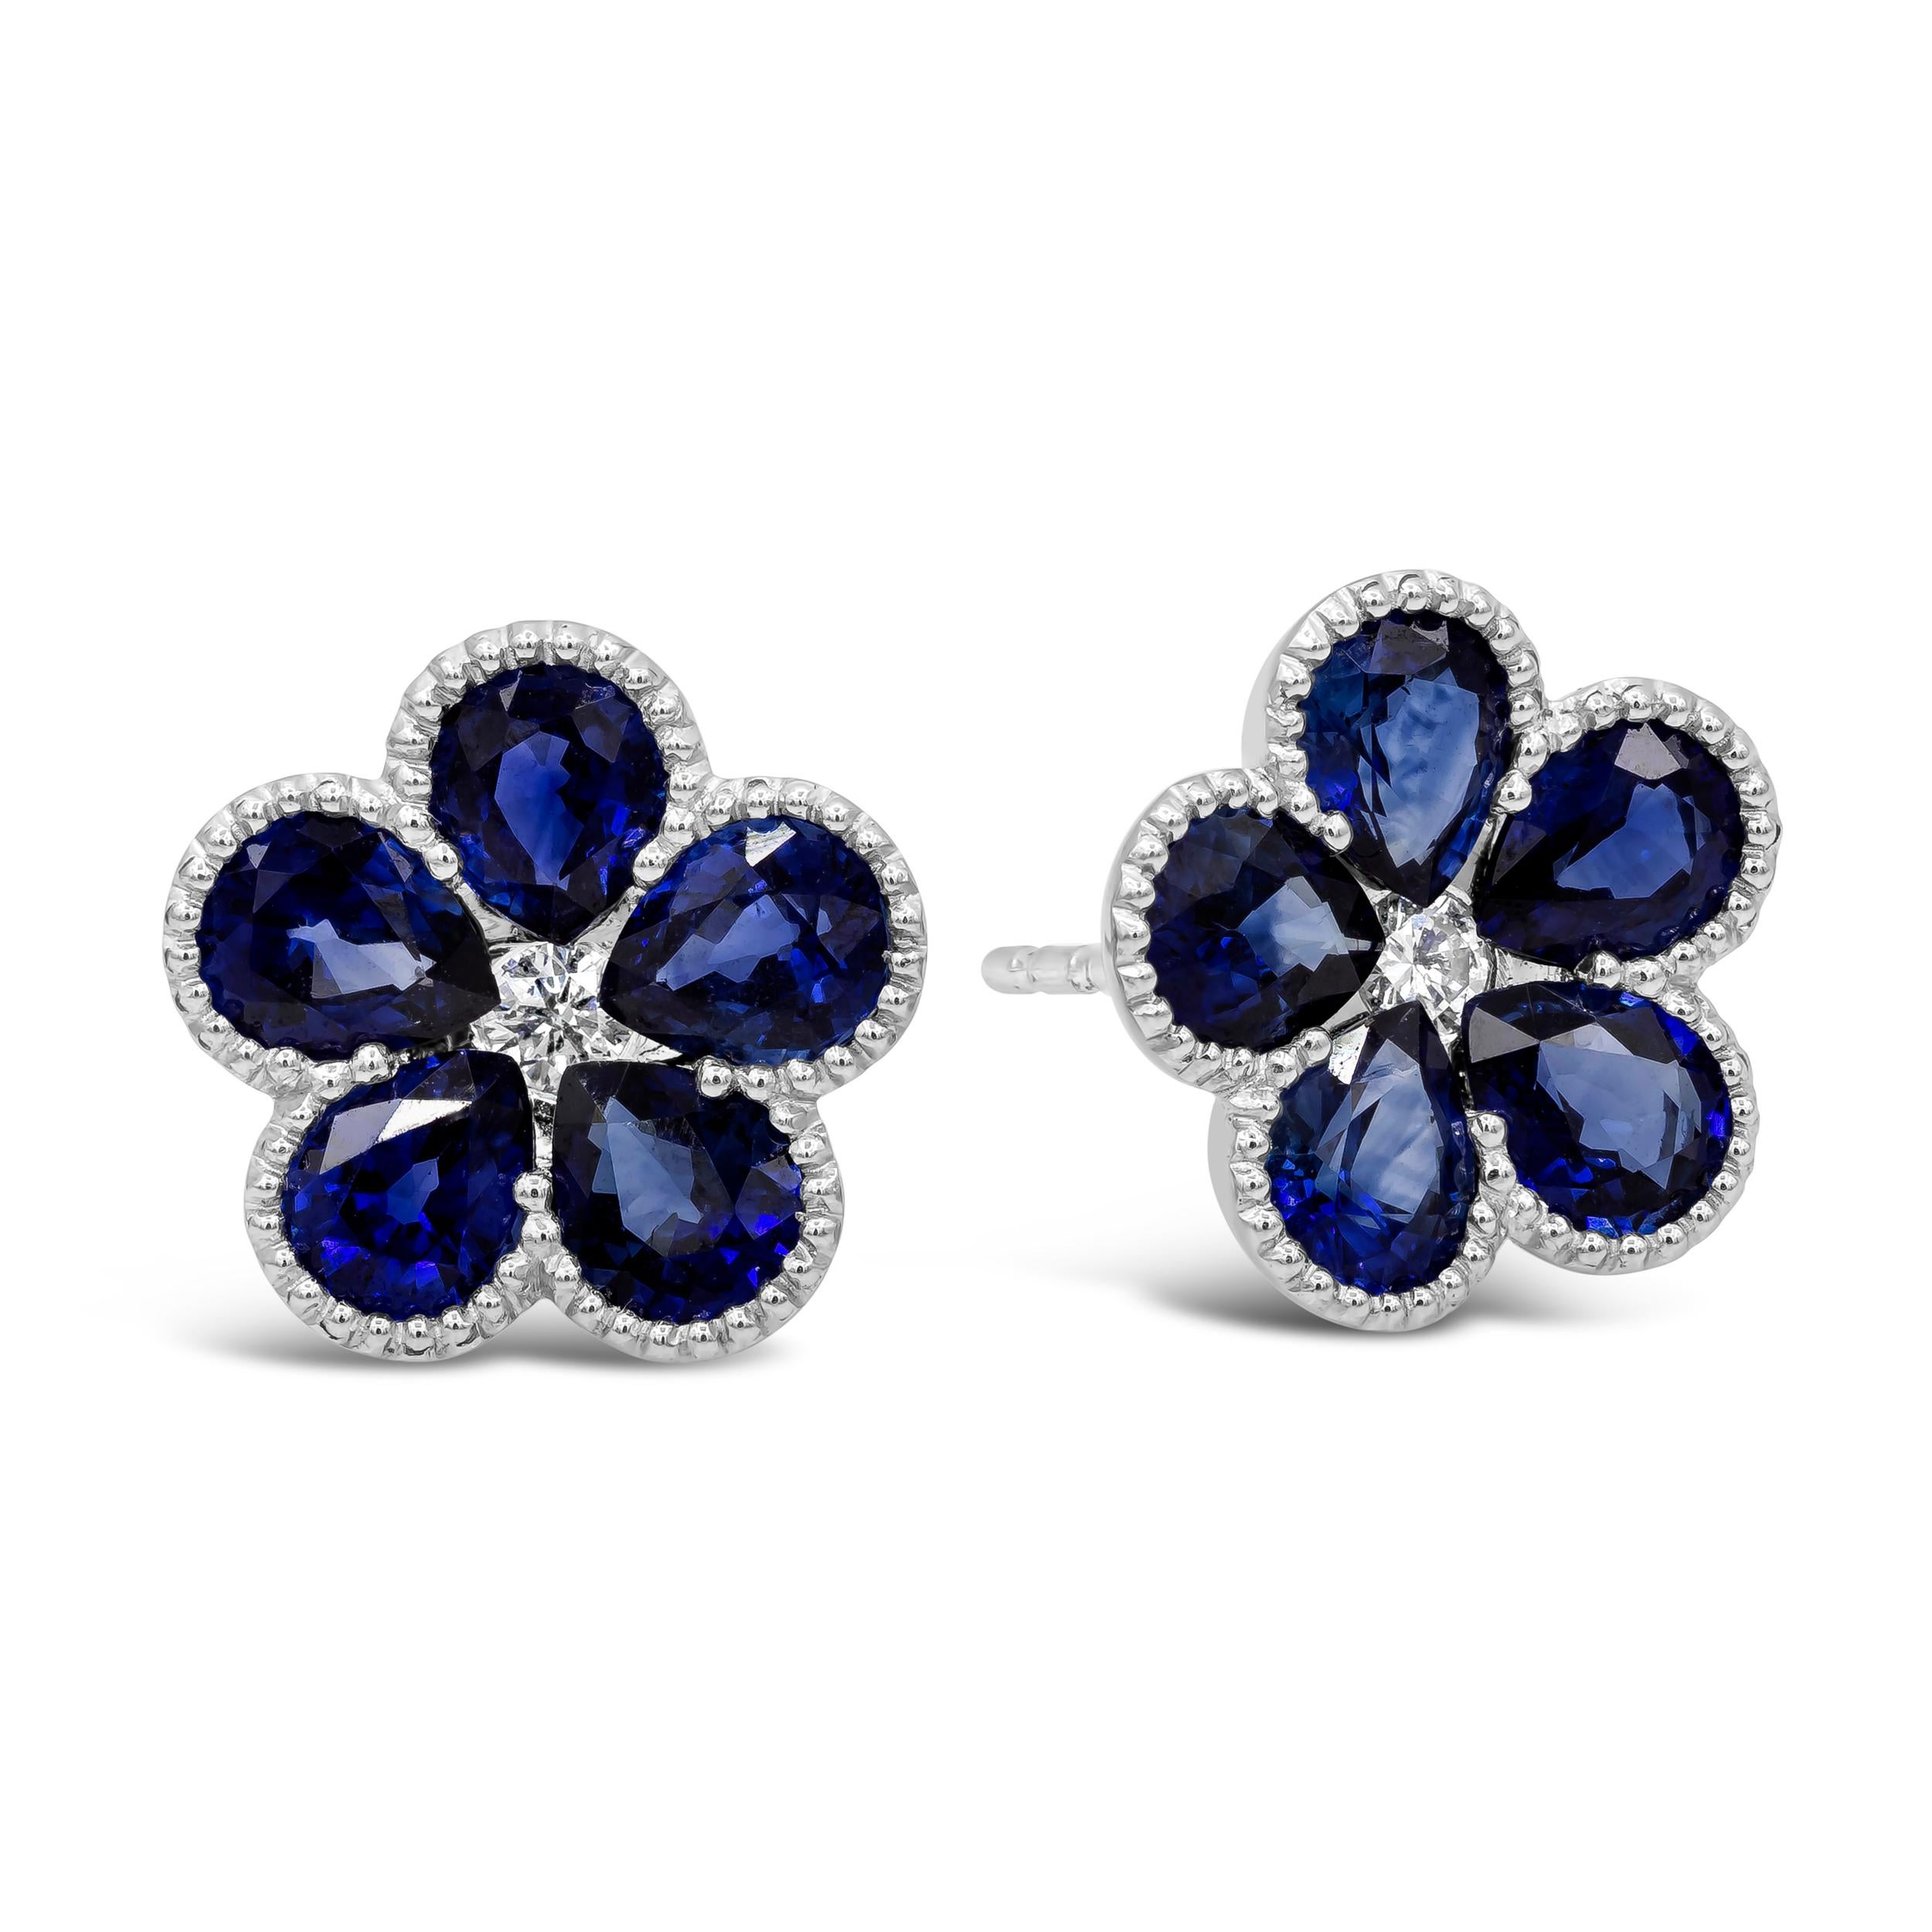 A fashionable pair of earrings featuring pear shape blue sapphires set in a flower. Each flower is set with a round brilliant diamond center, and finished with millegrain edges. Sapphires weigh 3.53 carats total. Diamonds weigh 0.11 carats total.